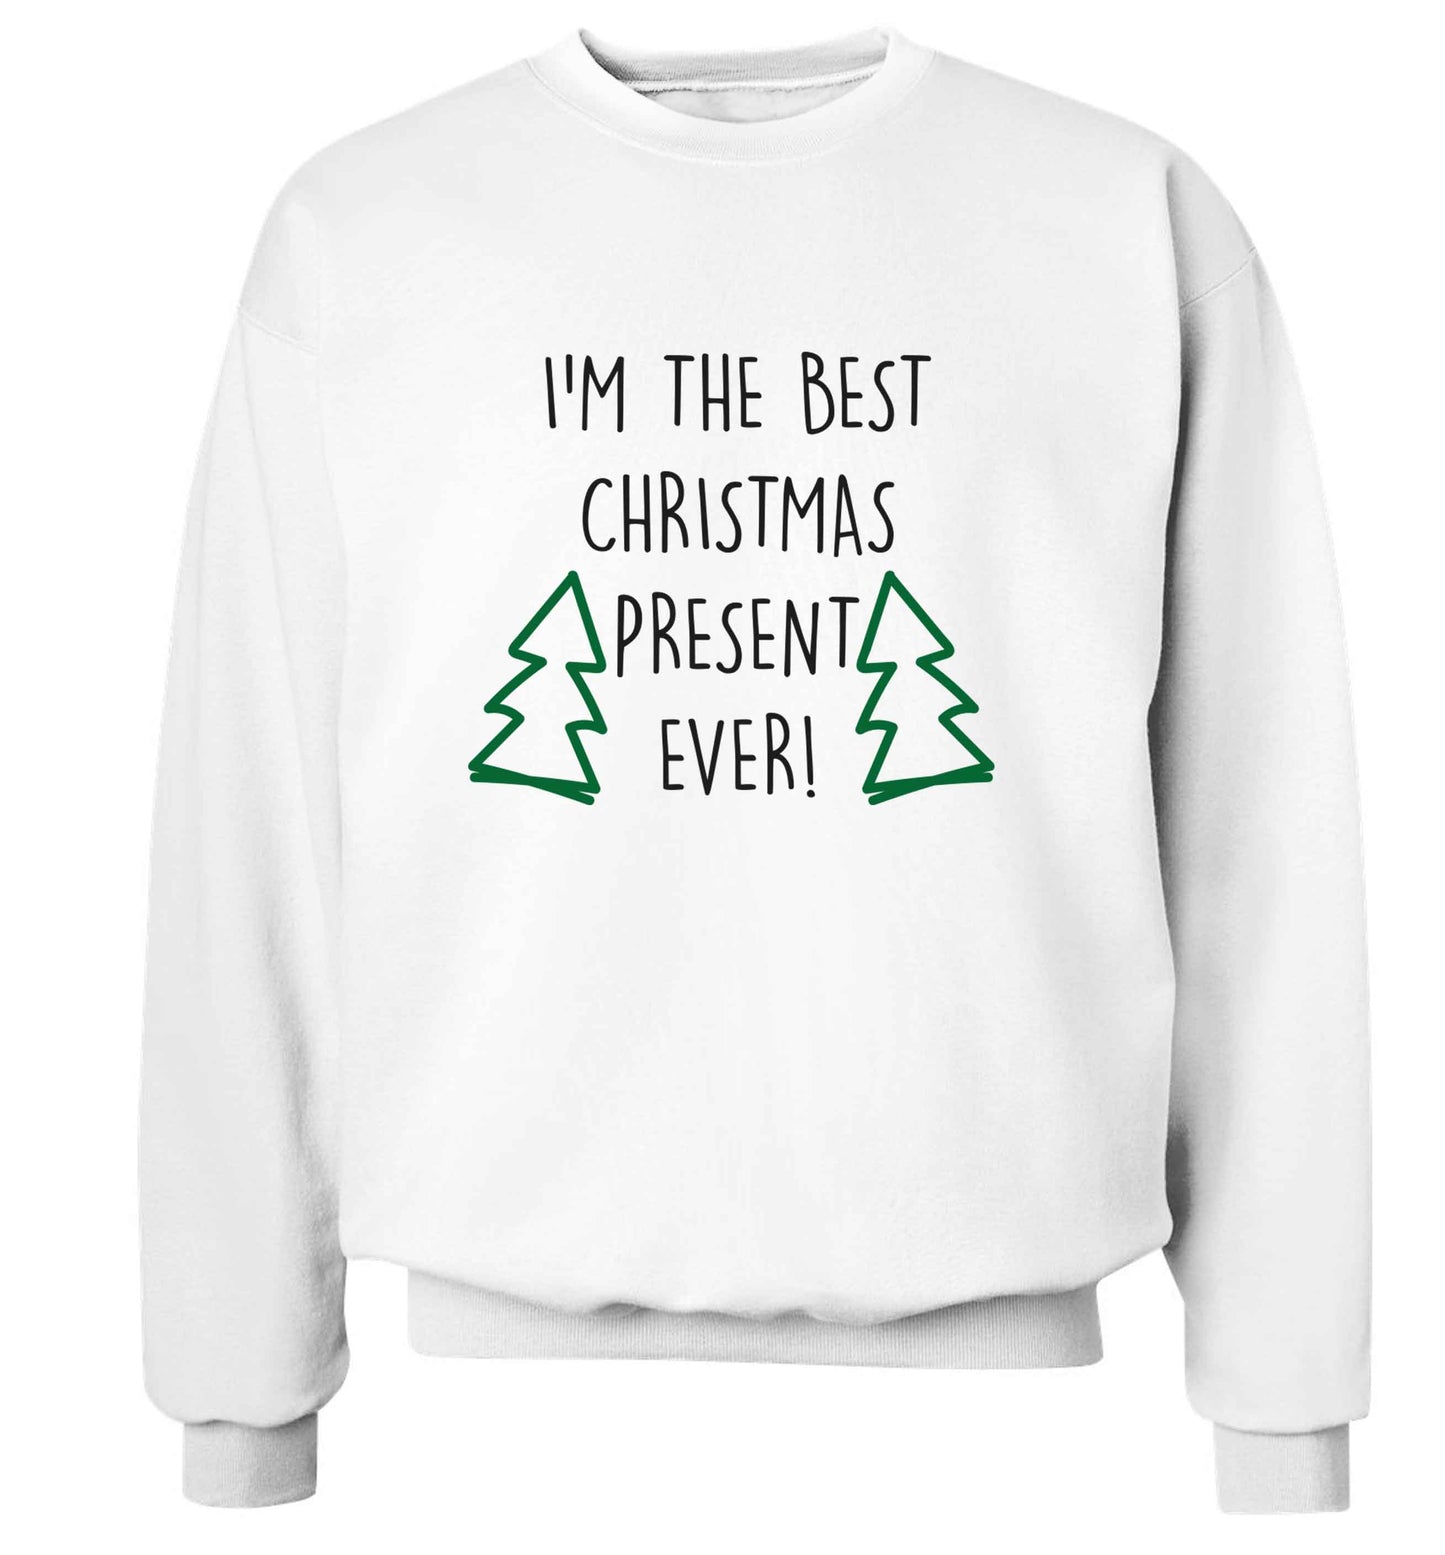 I'm the best Christmas present ever adult's unisex white sweater 2XL